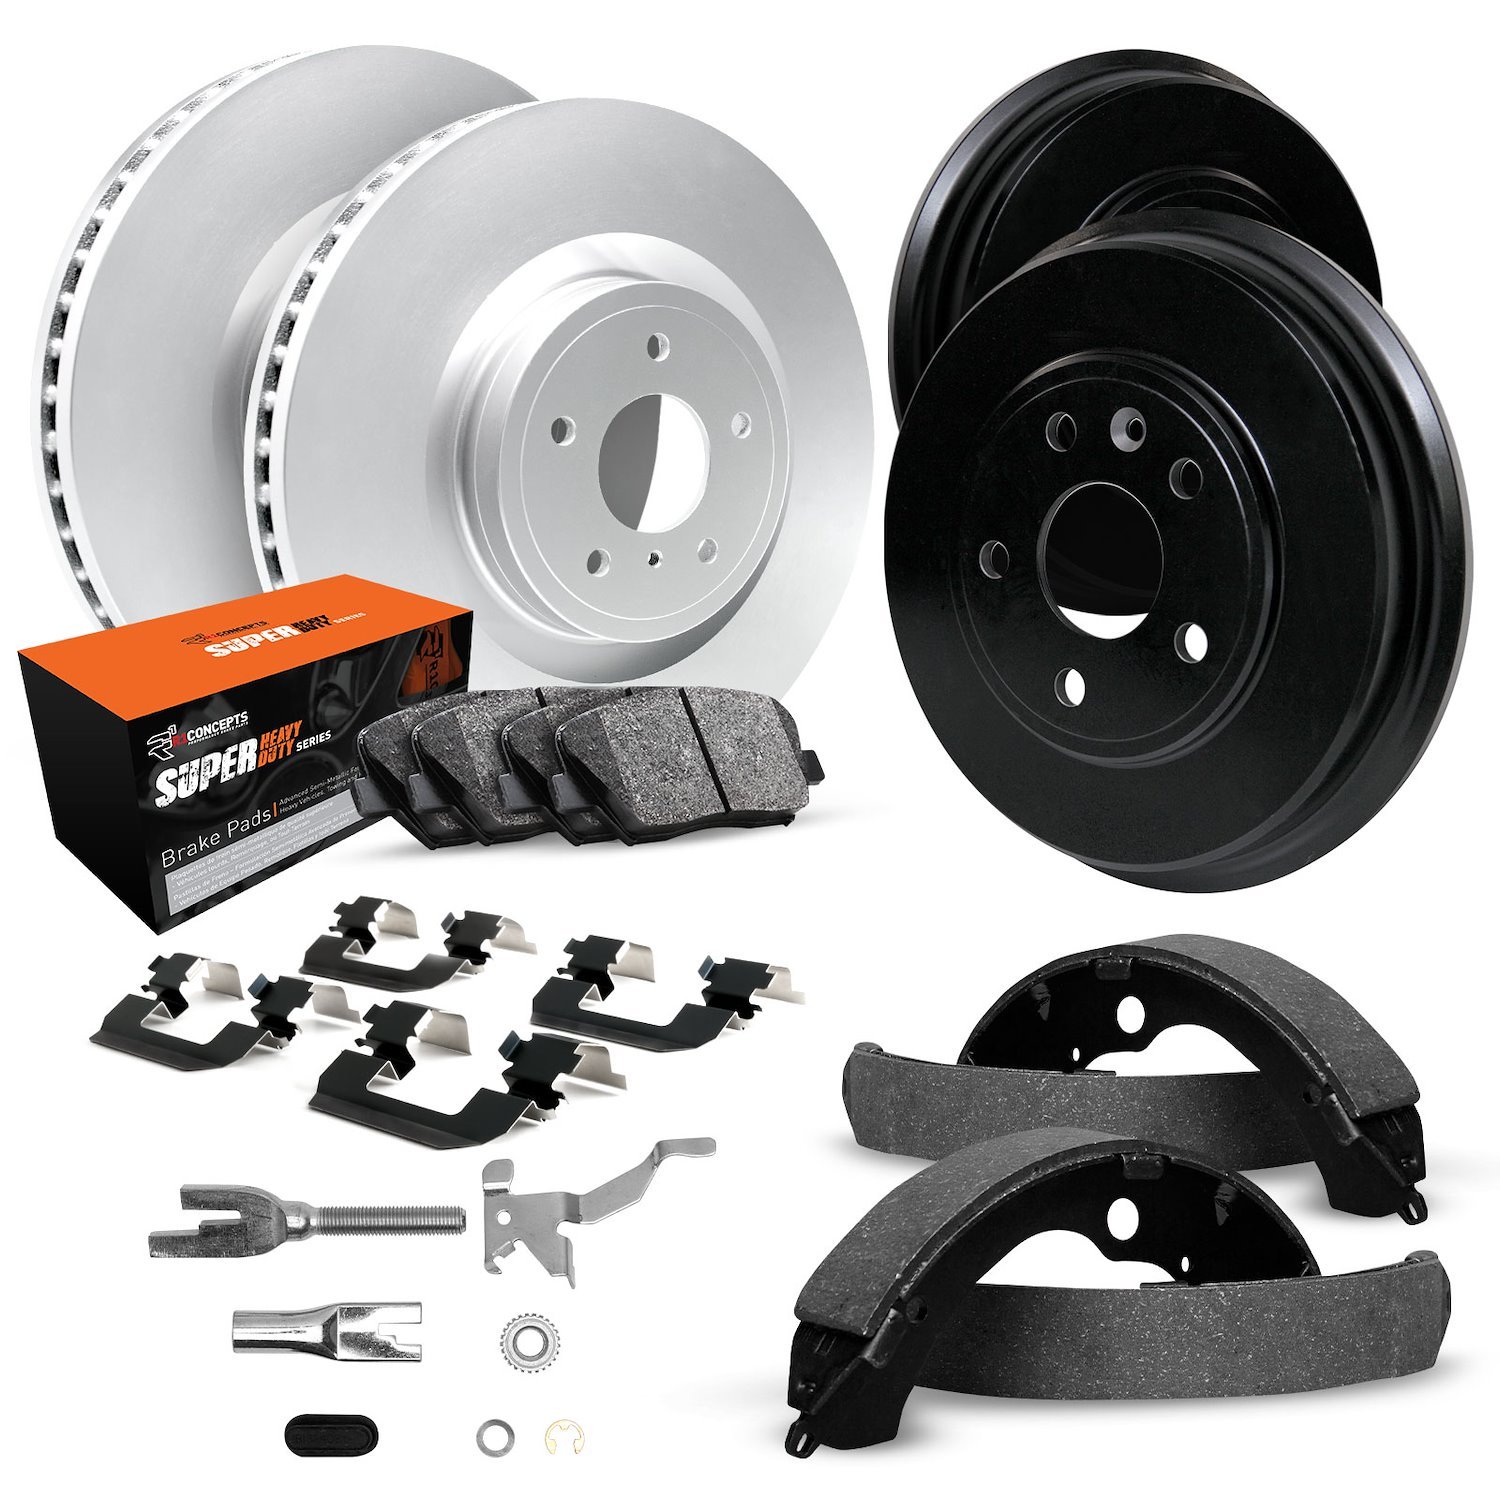 GEO-Carbon Brake Rotor & Drum Set w/Super-Duty Pads, Shoes, Hardware/Adjusters, 1974-1974 GM, Position: Front & Rear